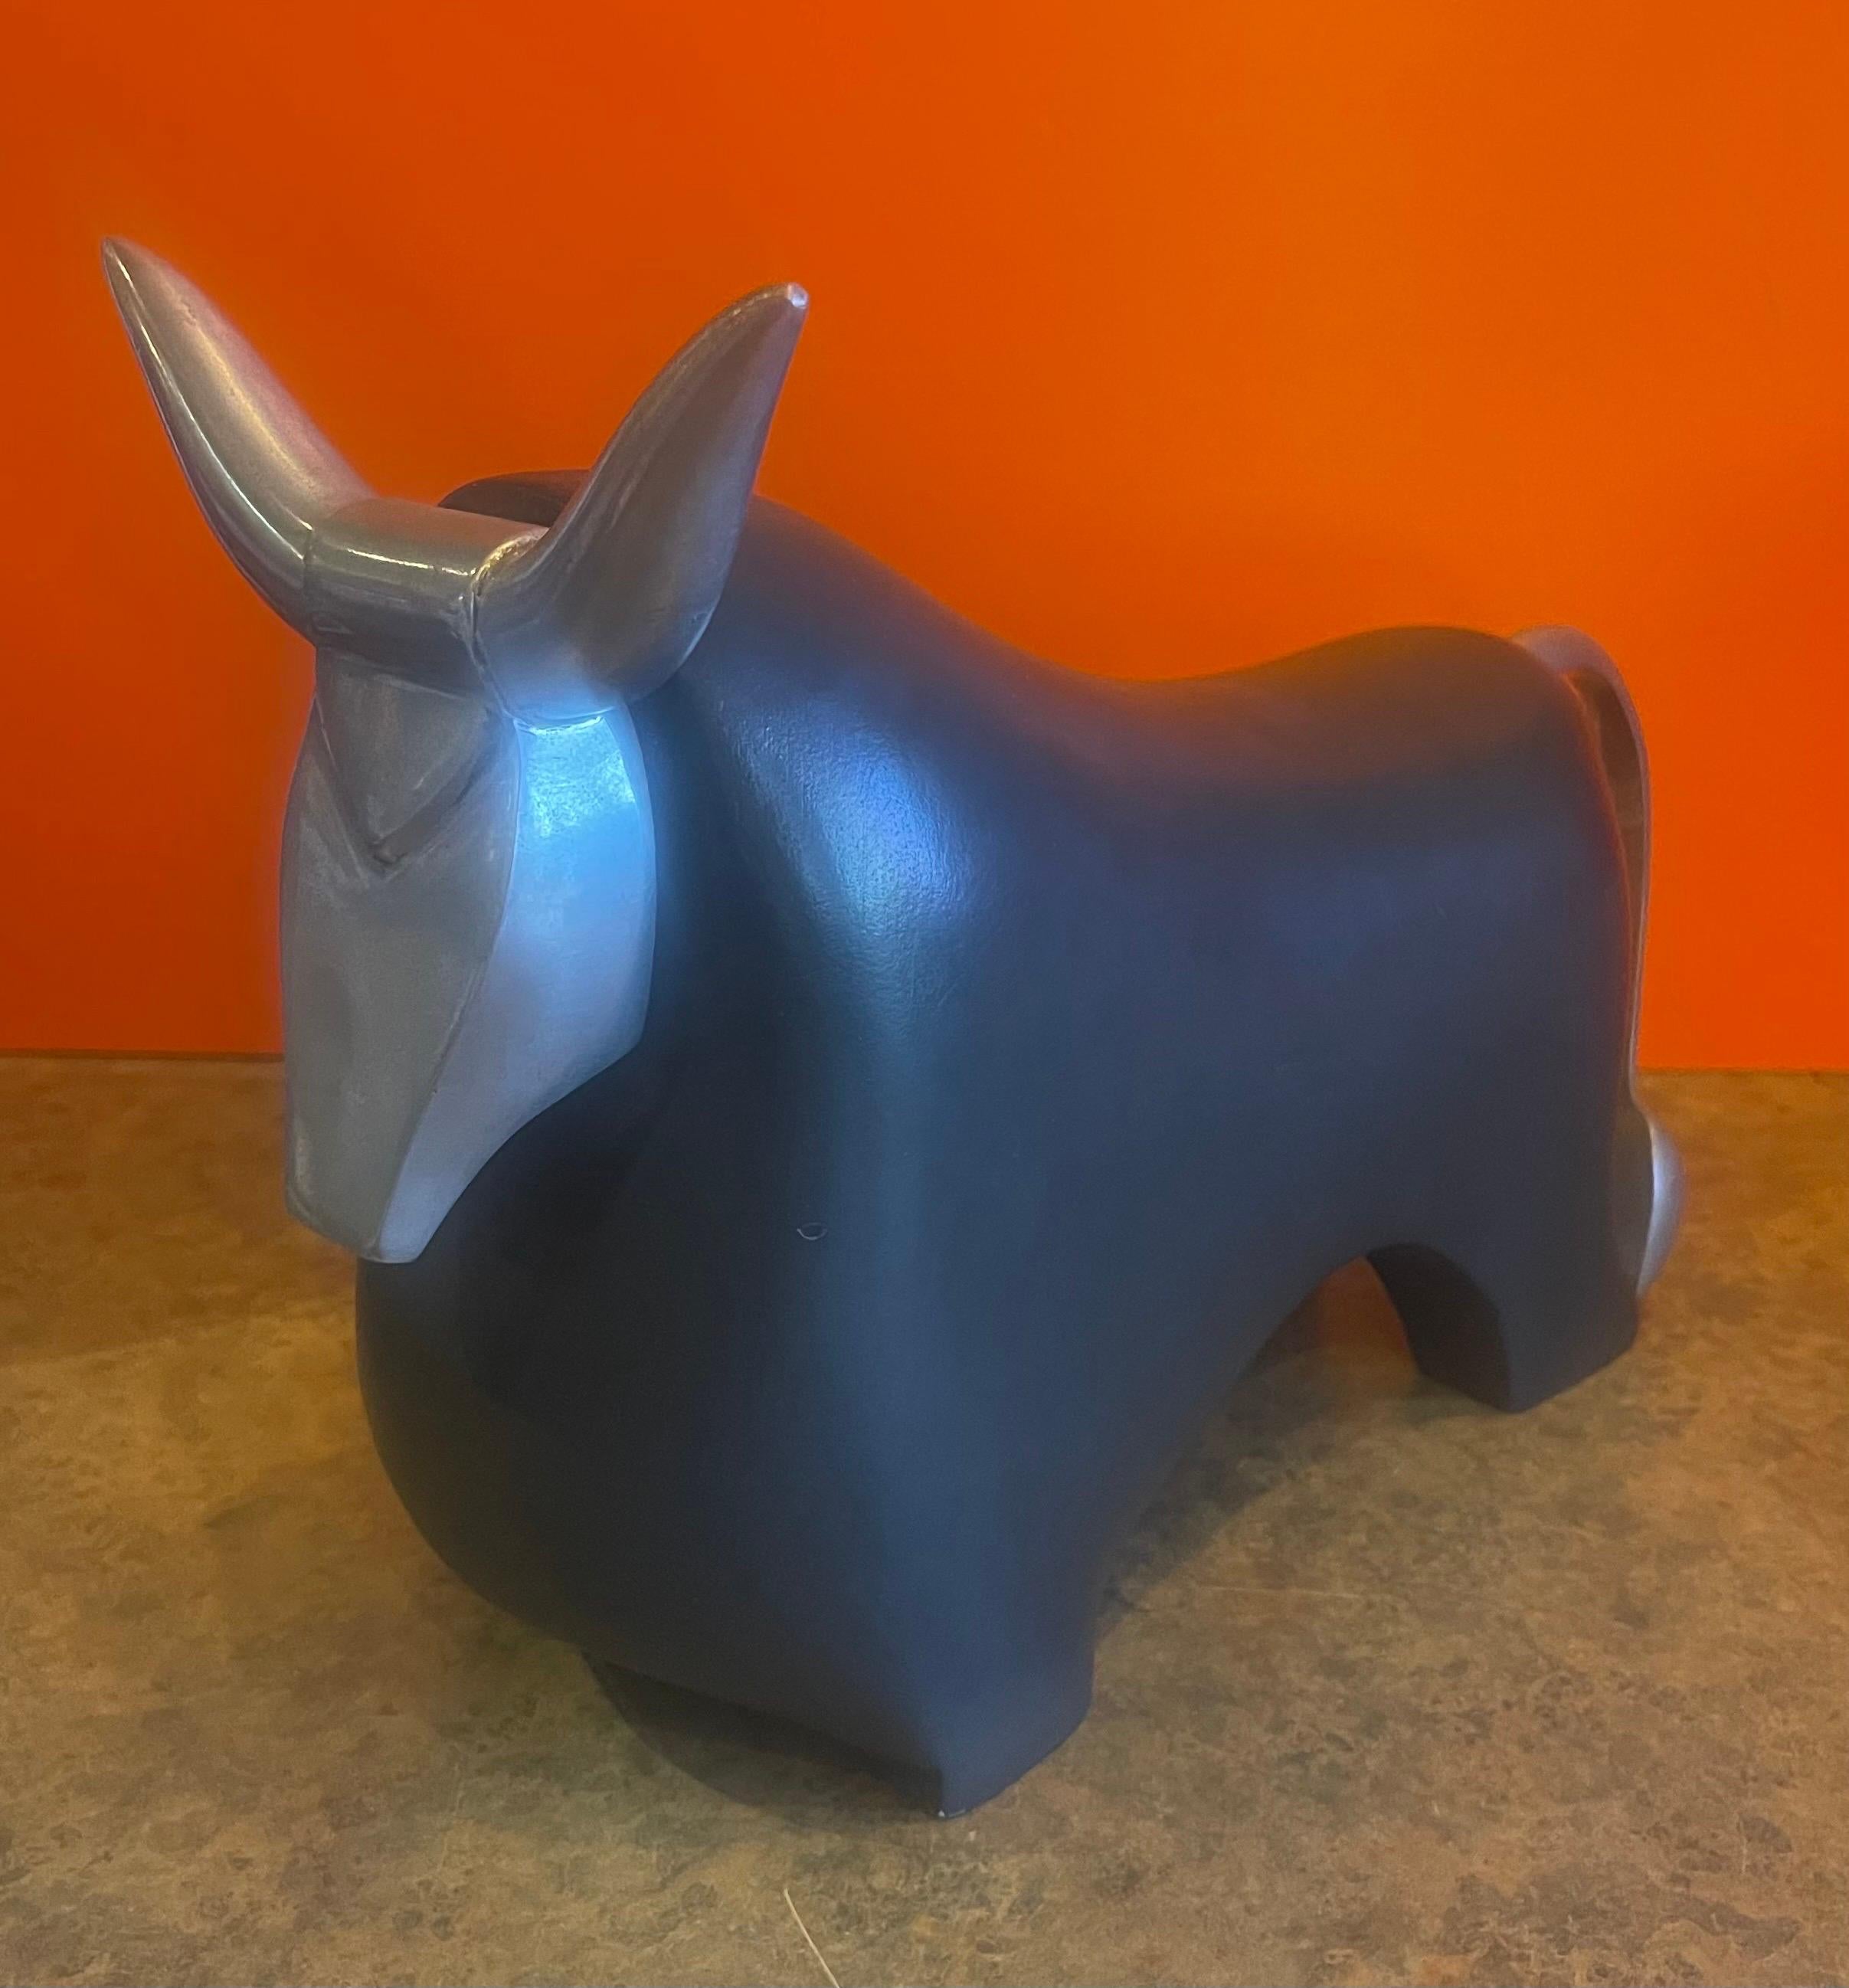 A very cool stylized ceramic and aluminum charging bull sculpture, circa 1990s. The piece is in very good vintage condition with no visible chips or cracks and measures 4.5